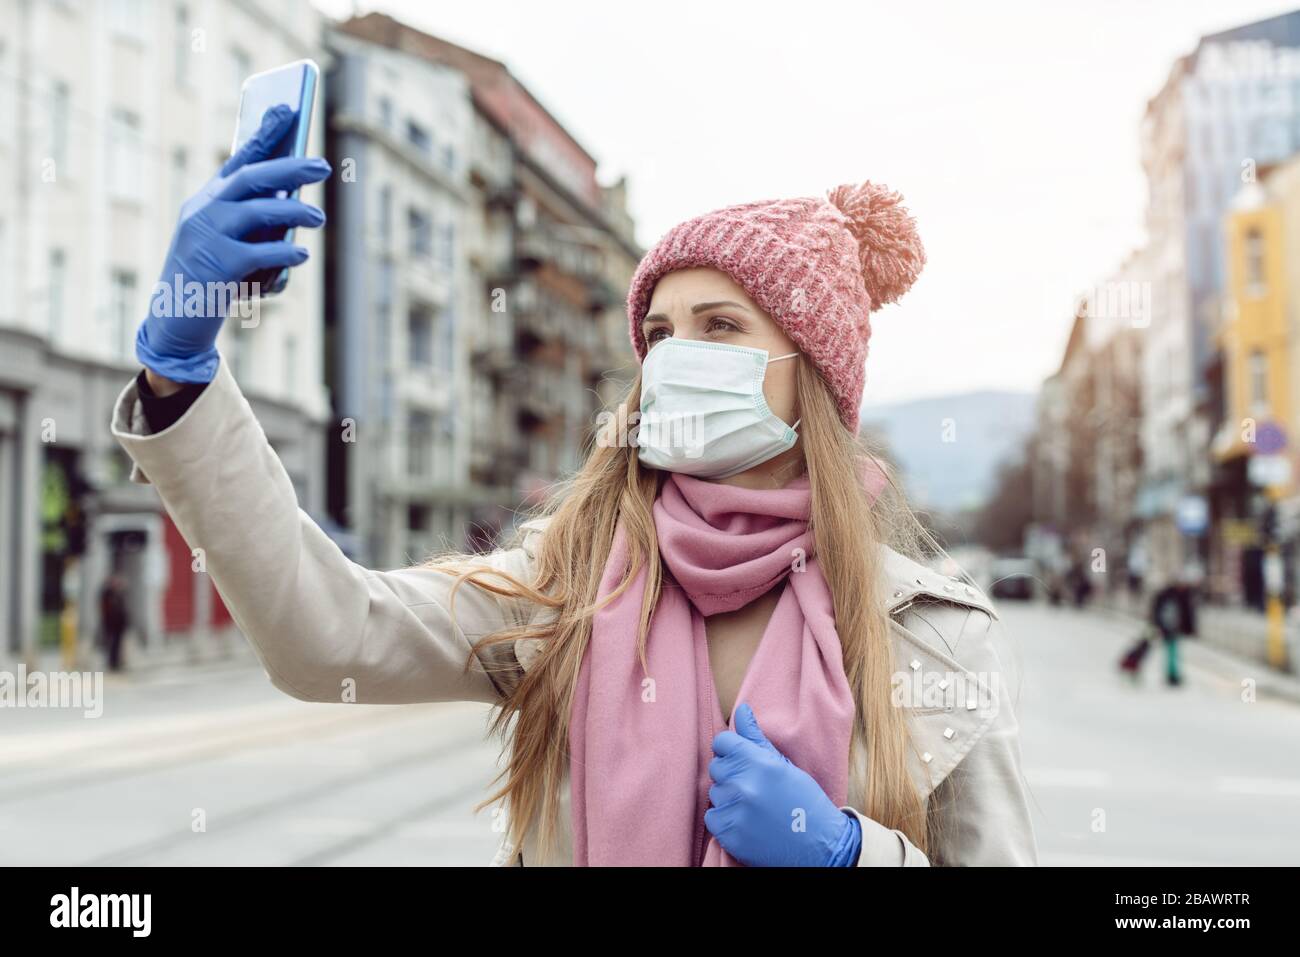 Woman with medical mask and gloves taking selfie in lockdown city Stock Photo